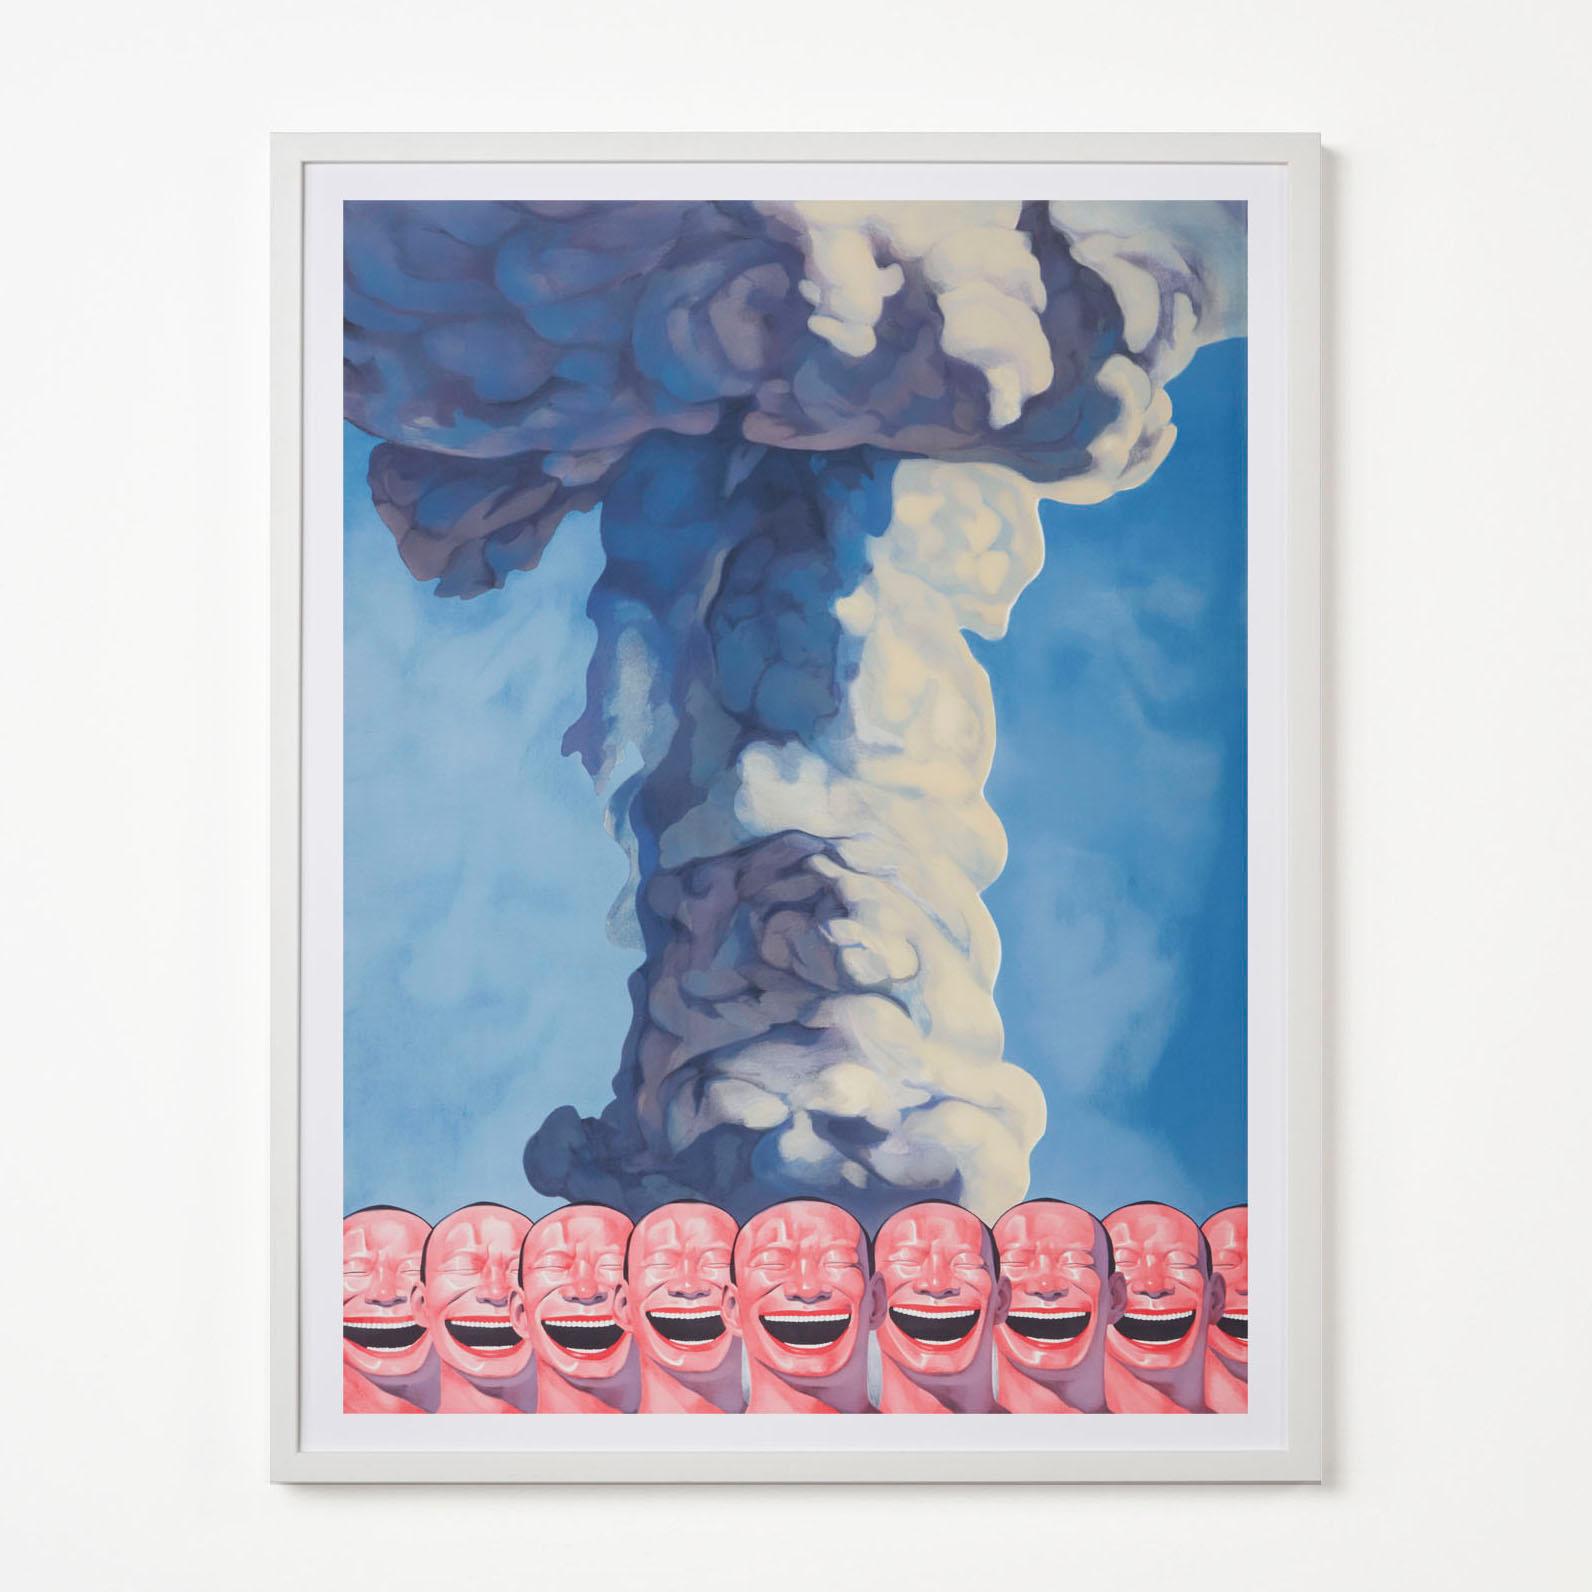 Mushroom Cloud, Yue Minjun- Art, Lithograph, Limited Edition, Chinese For Sale 6